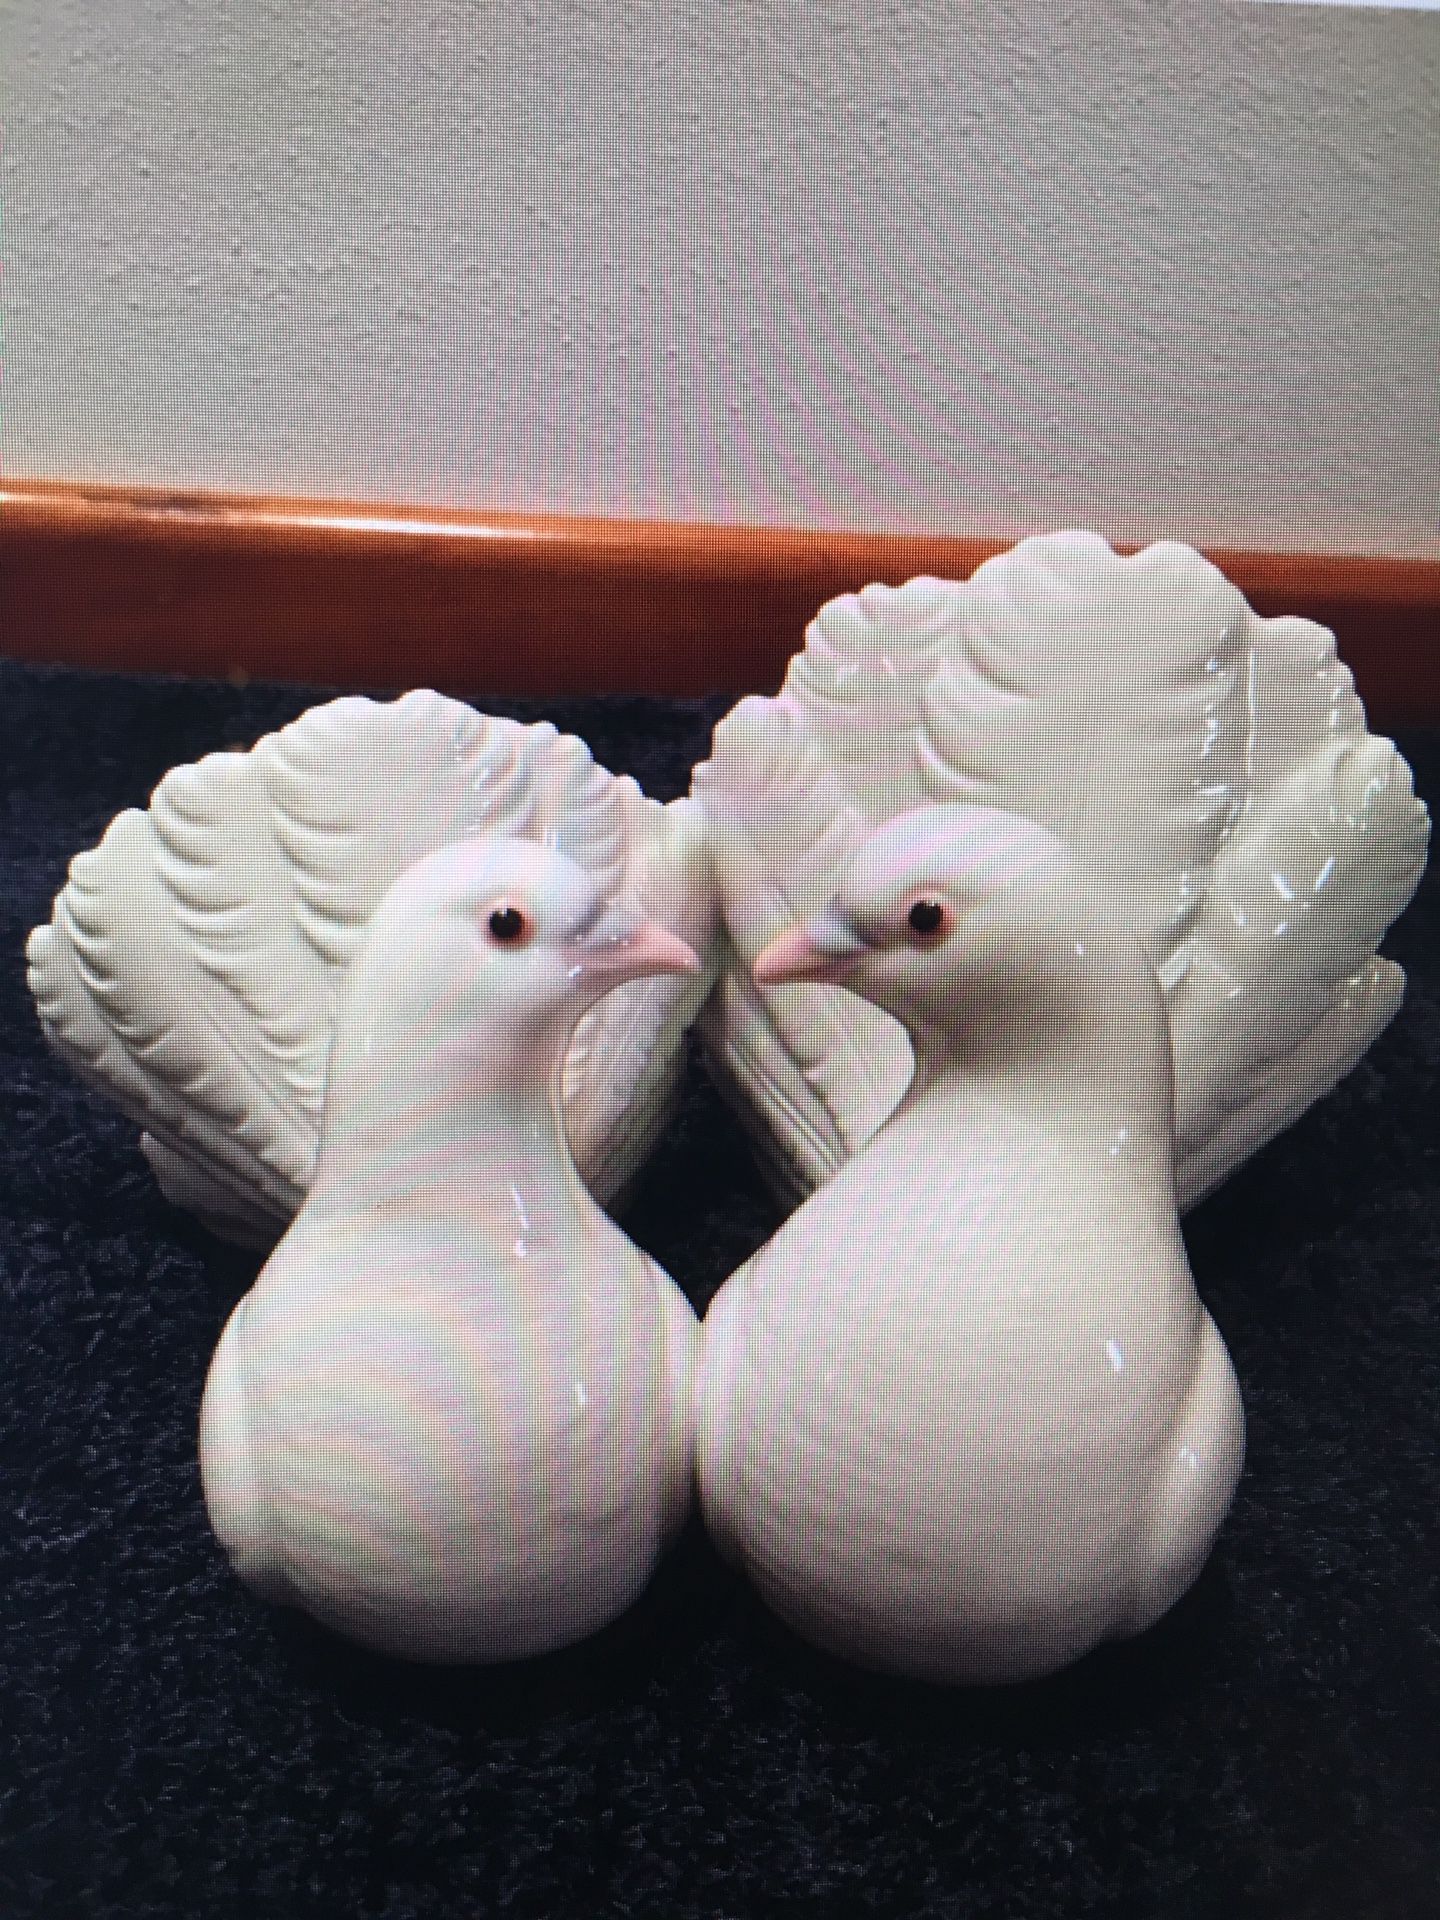 Lladro Couple of Doves